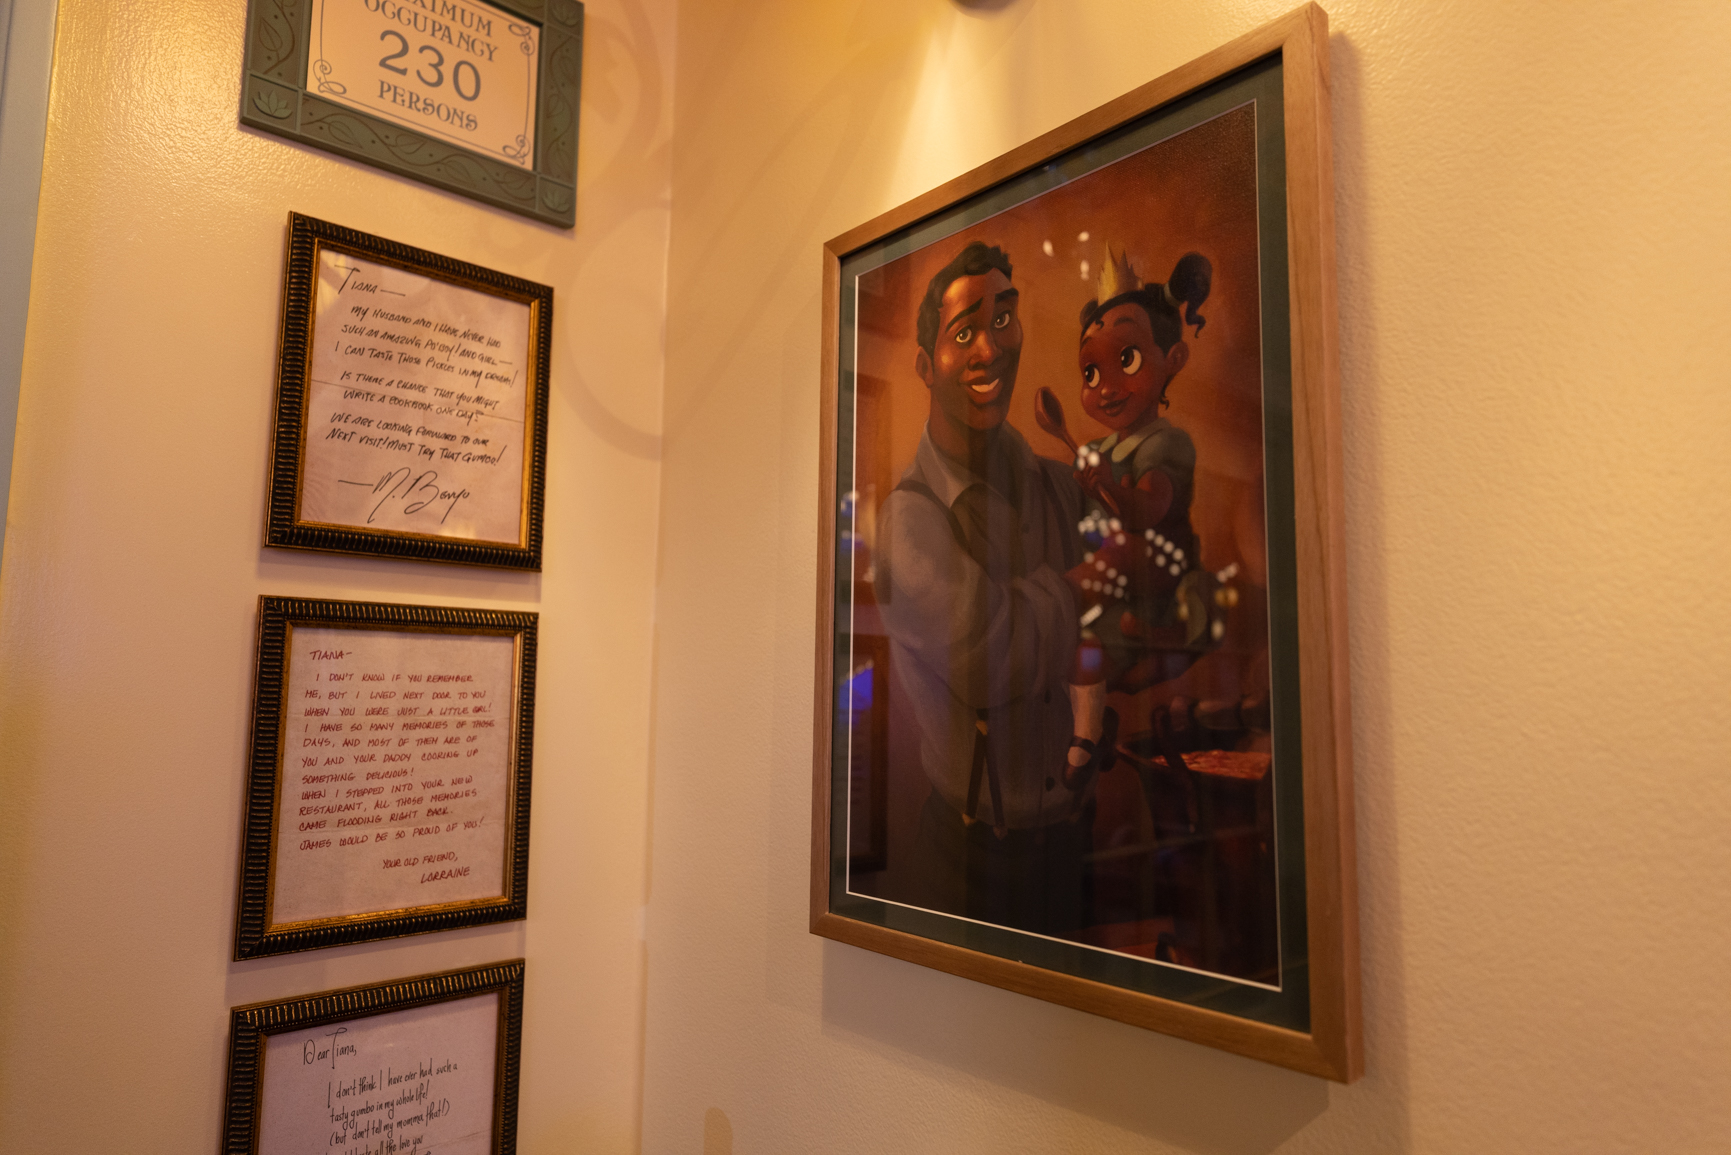 Guests will find a portrait of Tiana and her father, James, inside Tiana’s Palace, which will open in New Orleans Square at Disneyland Park in Anaheim, Calif., on Sept. 7, 2023. Inspired by the Walt Disney Animation Studios film “The Princess and the Frog,” the reimagined quick service restaurant will serve authentic New Orleans flavors inspired by Tiana’s friends and adventures. While Tiana’s Palace is not a character dining location, guests may find Tiana in New Orleans Square. (Christian Thompson/Disneyland Resort) 